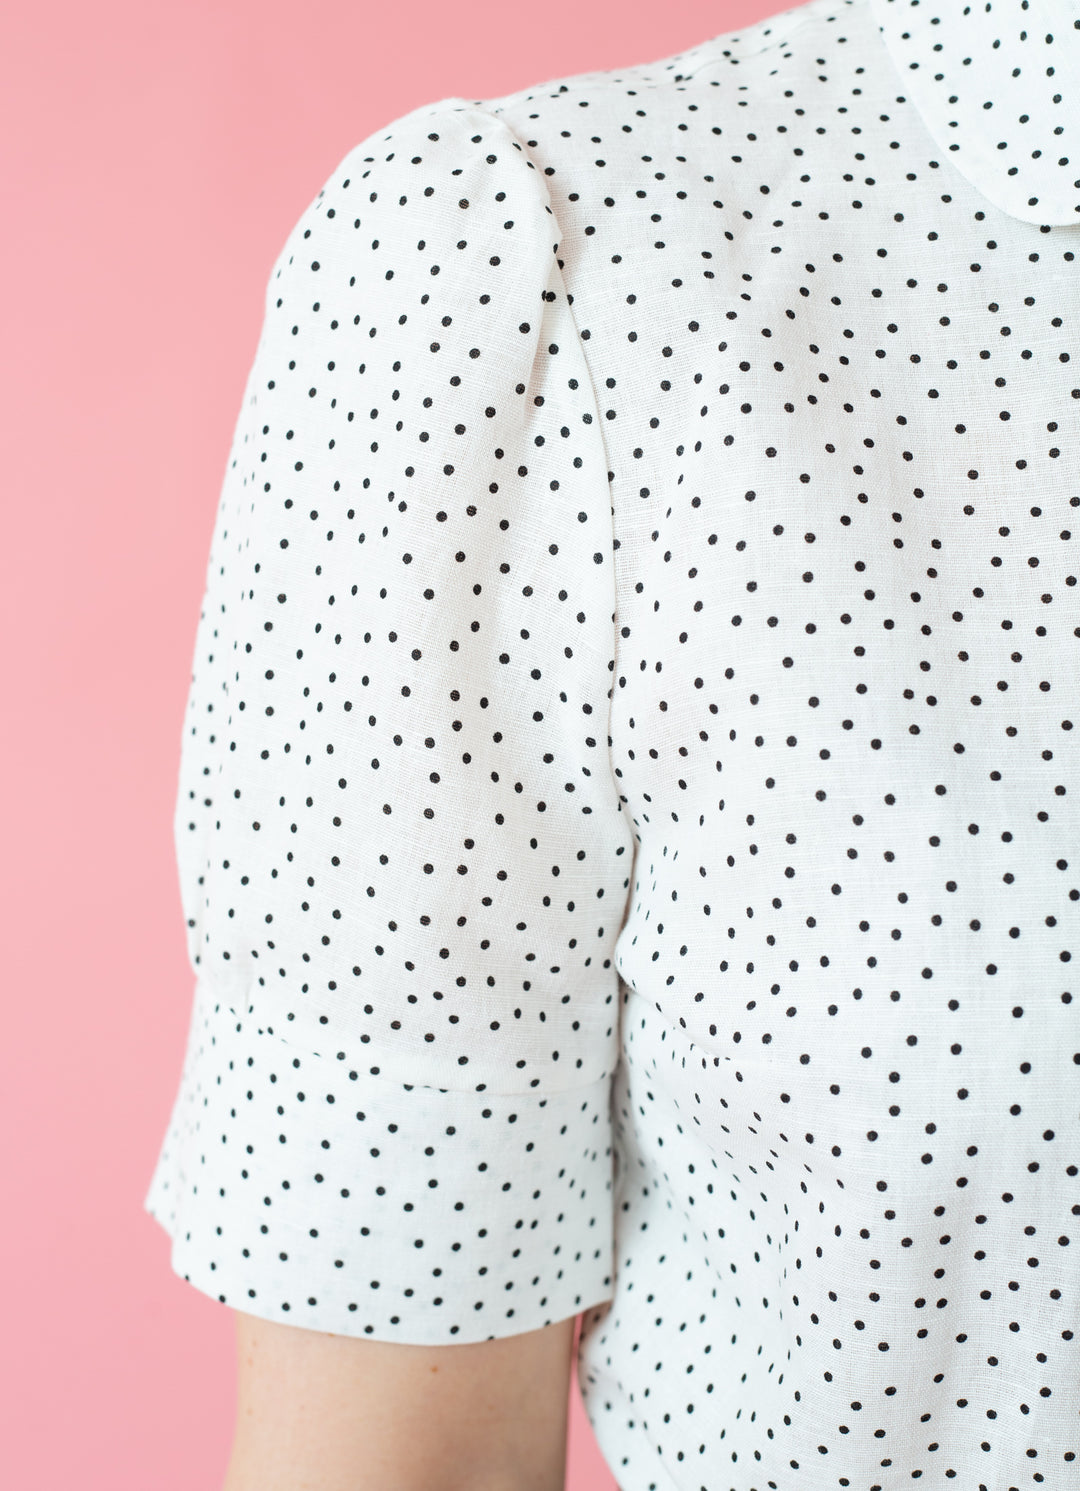 Classic blouse - white with black dots